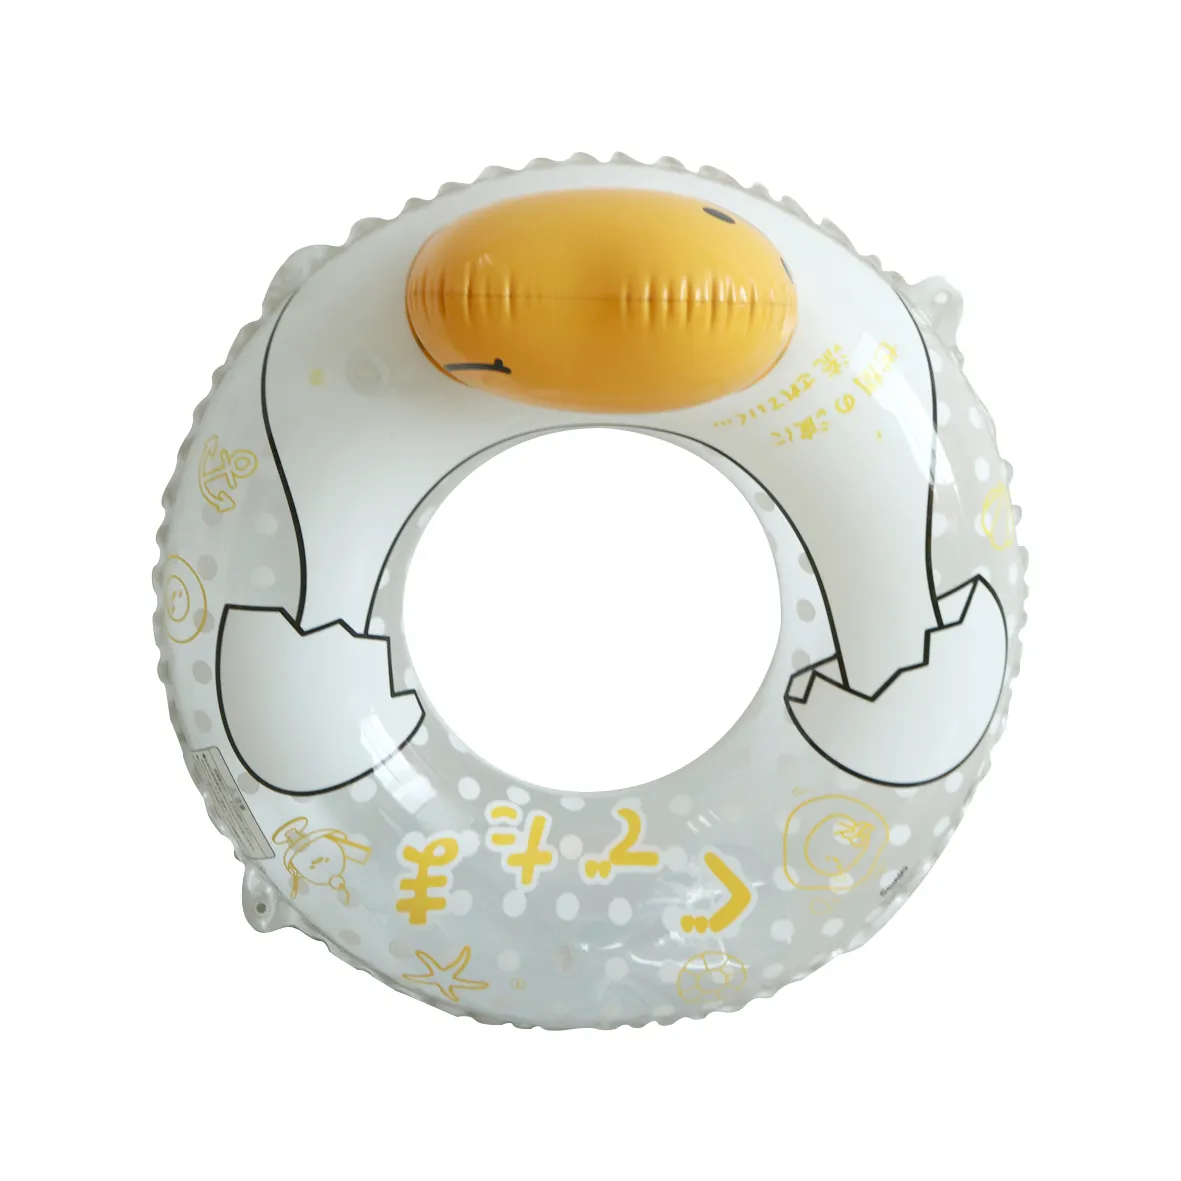 Lively Egg Print Inflatable Pool Float Ring Summer Safety Swim Ring for Water Entertainment